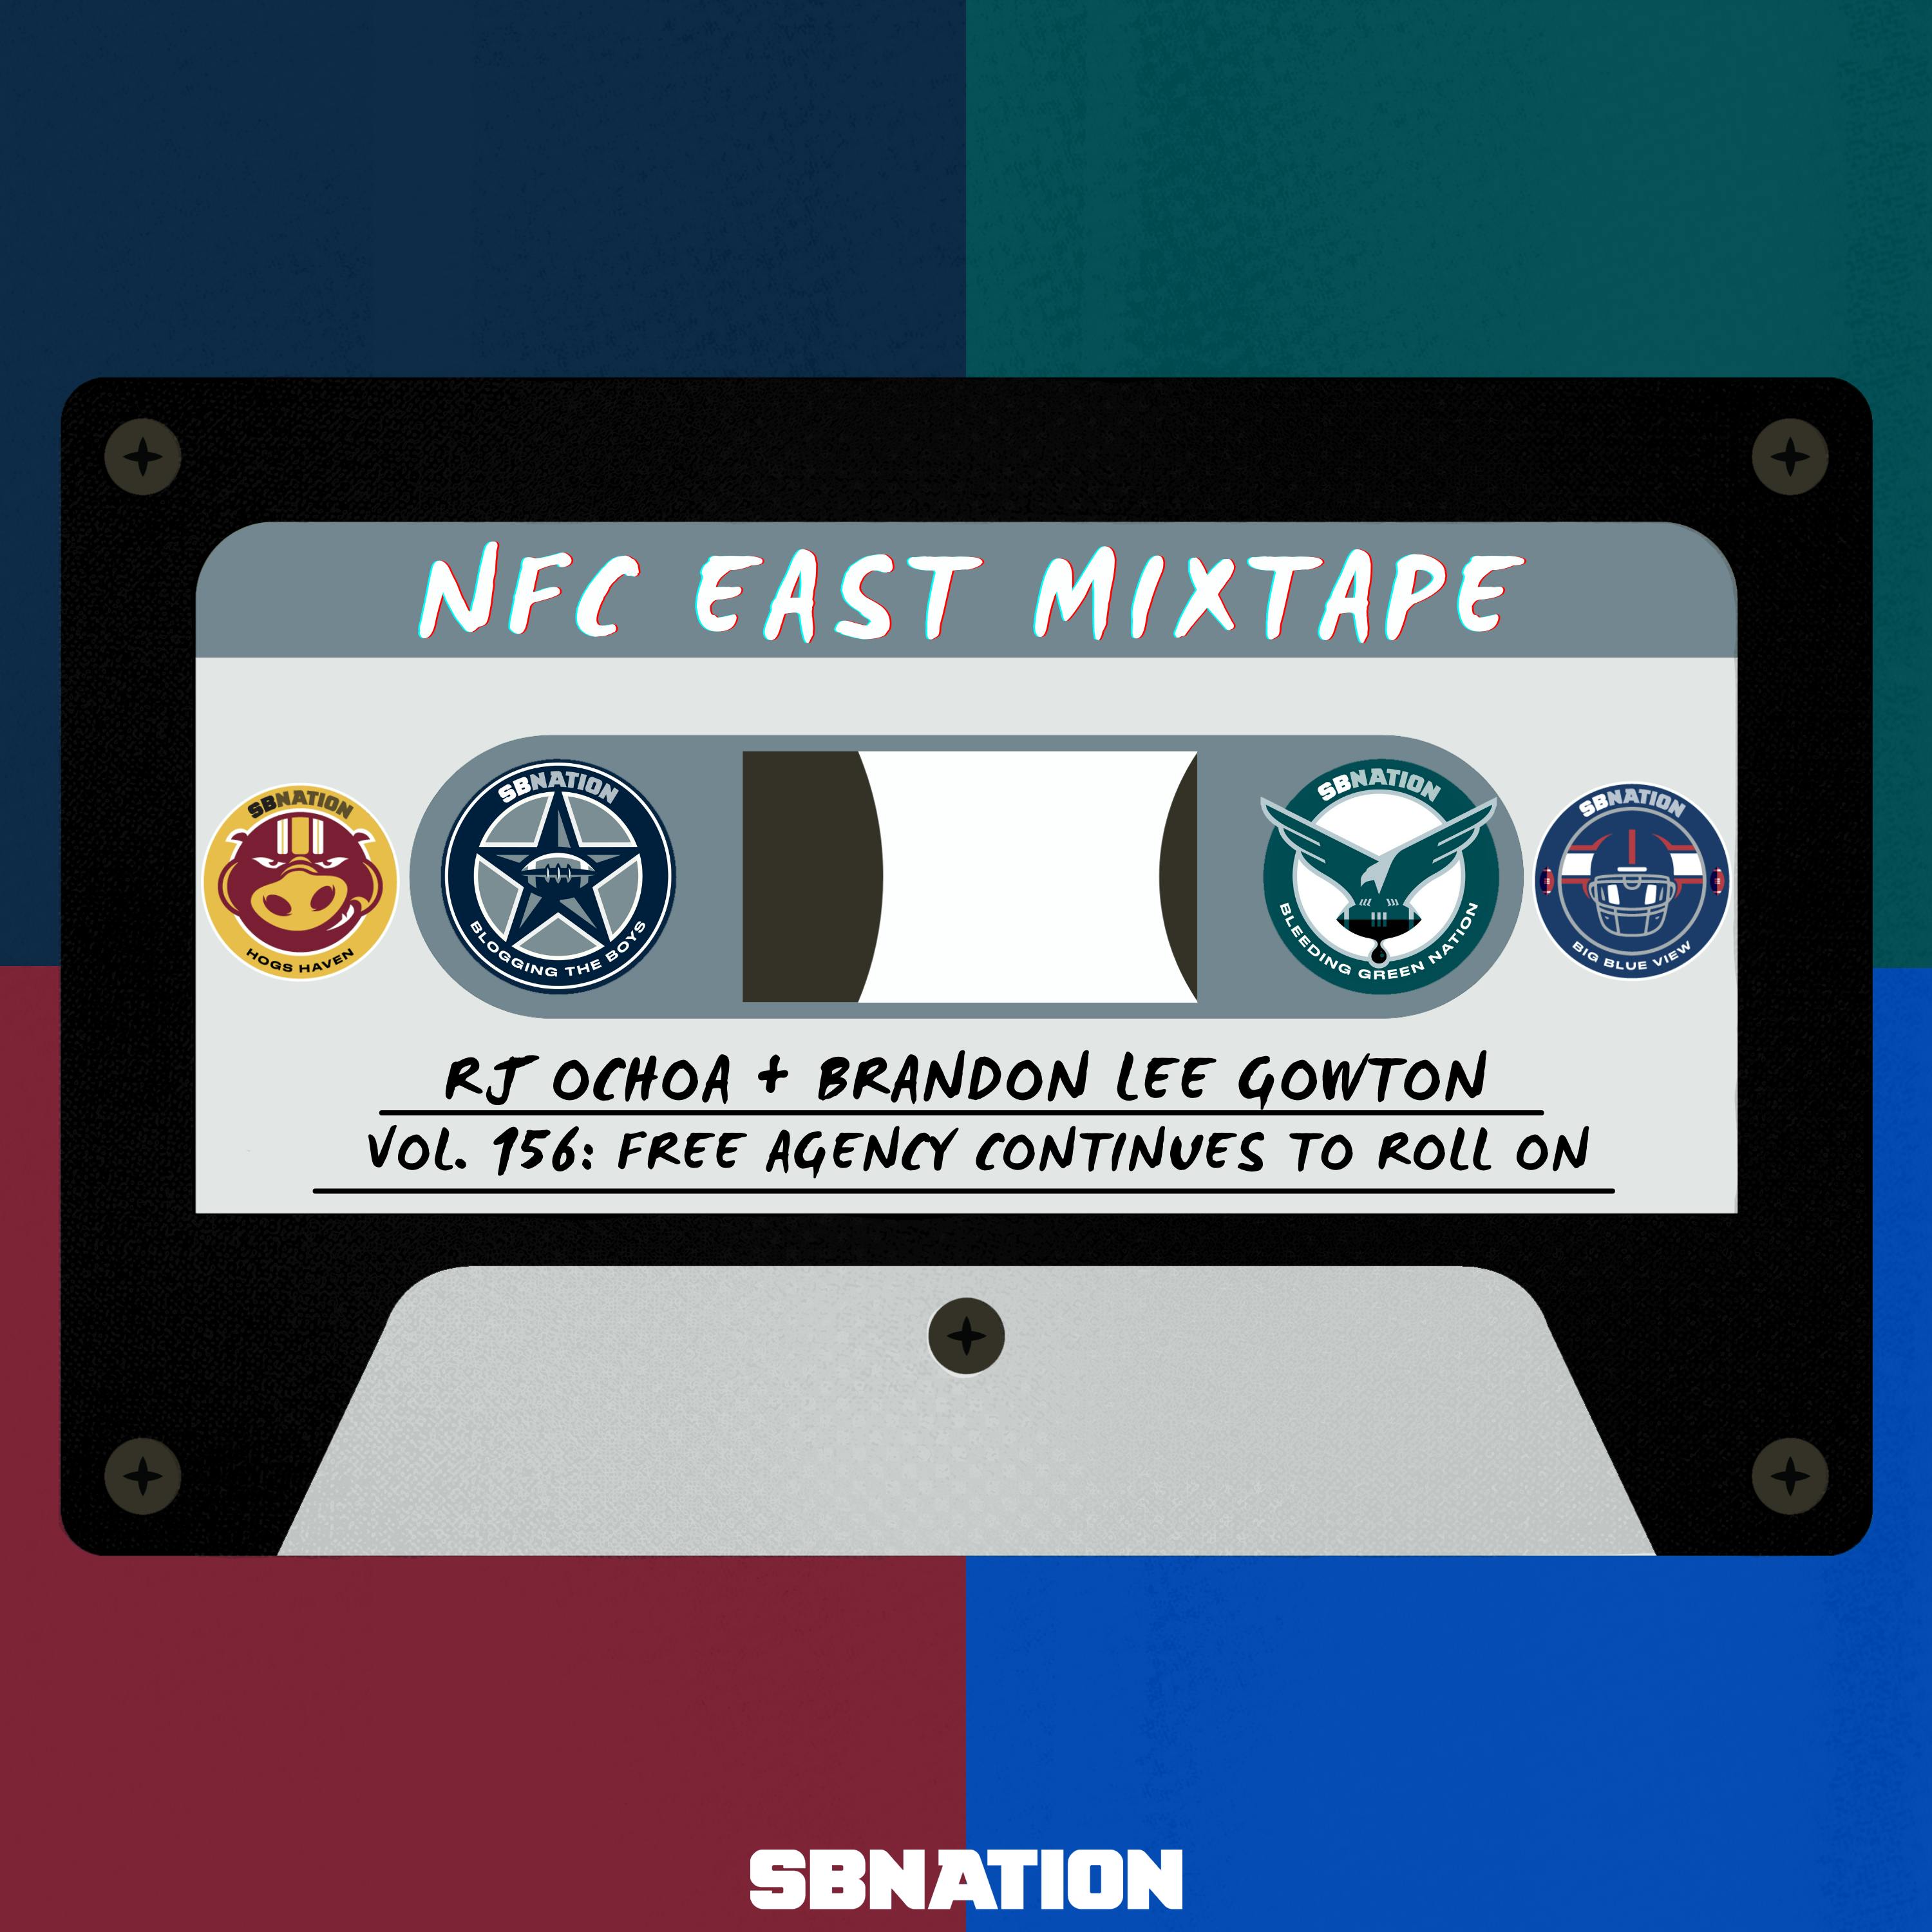 NFC East Mixtape Vol. 156: Free Agency continues to roll on